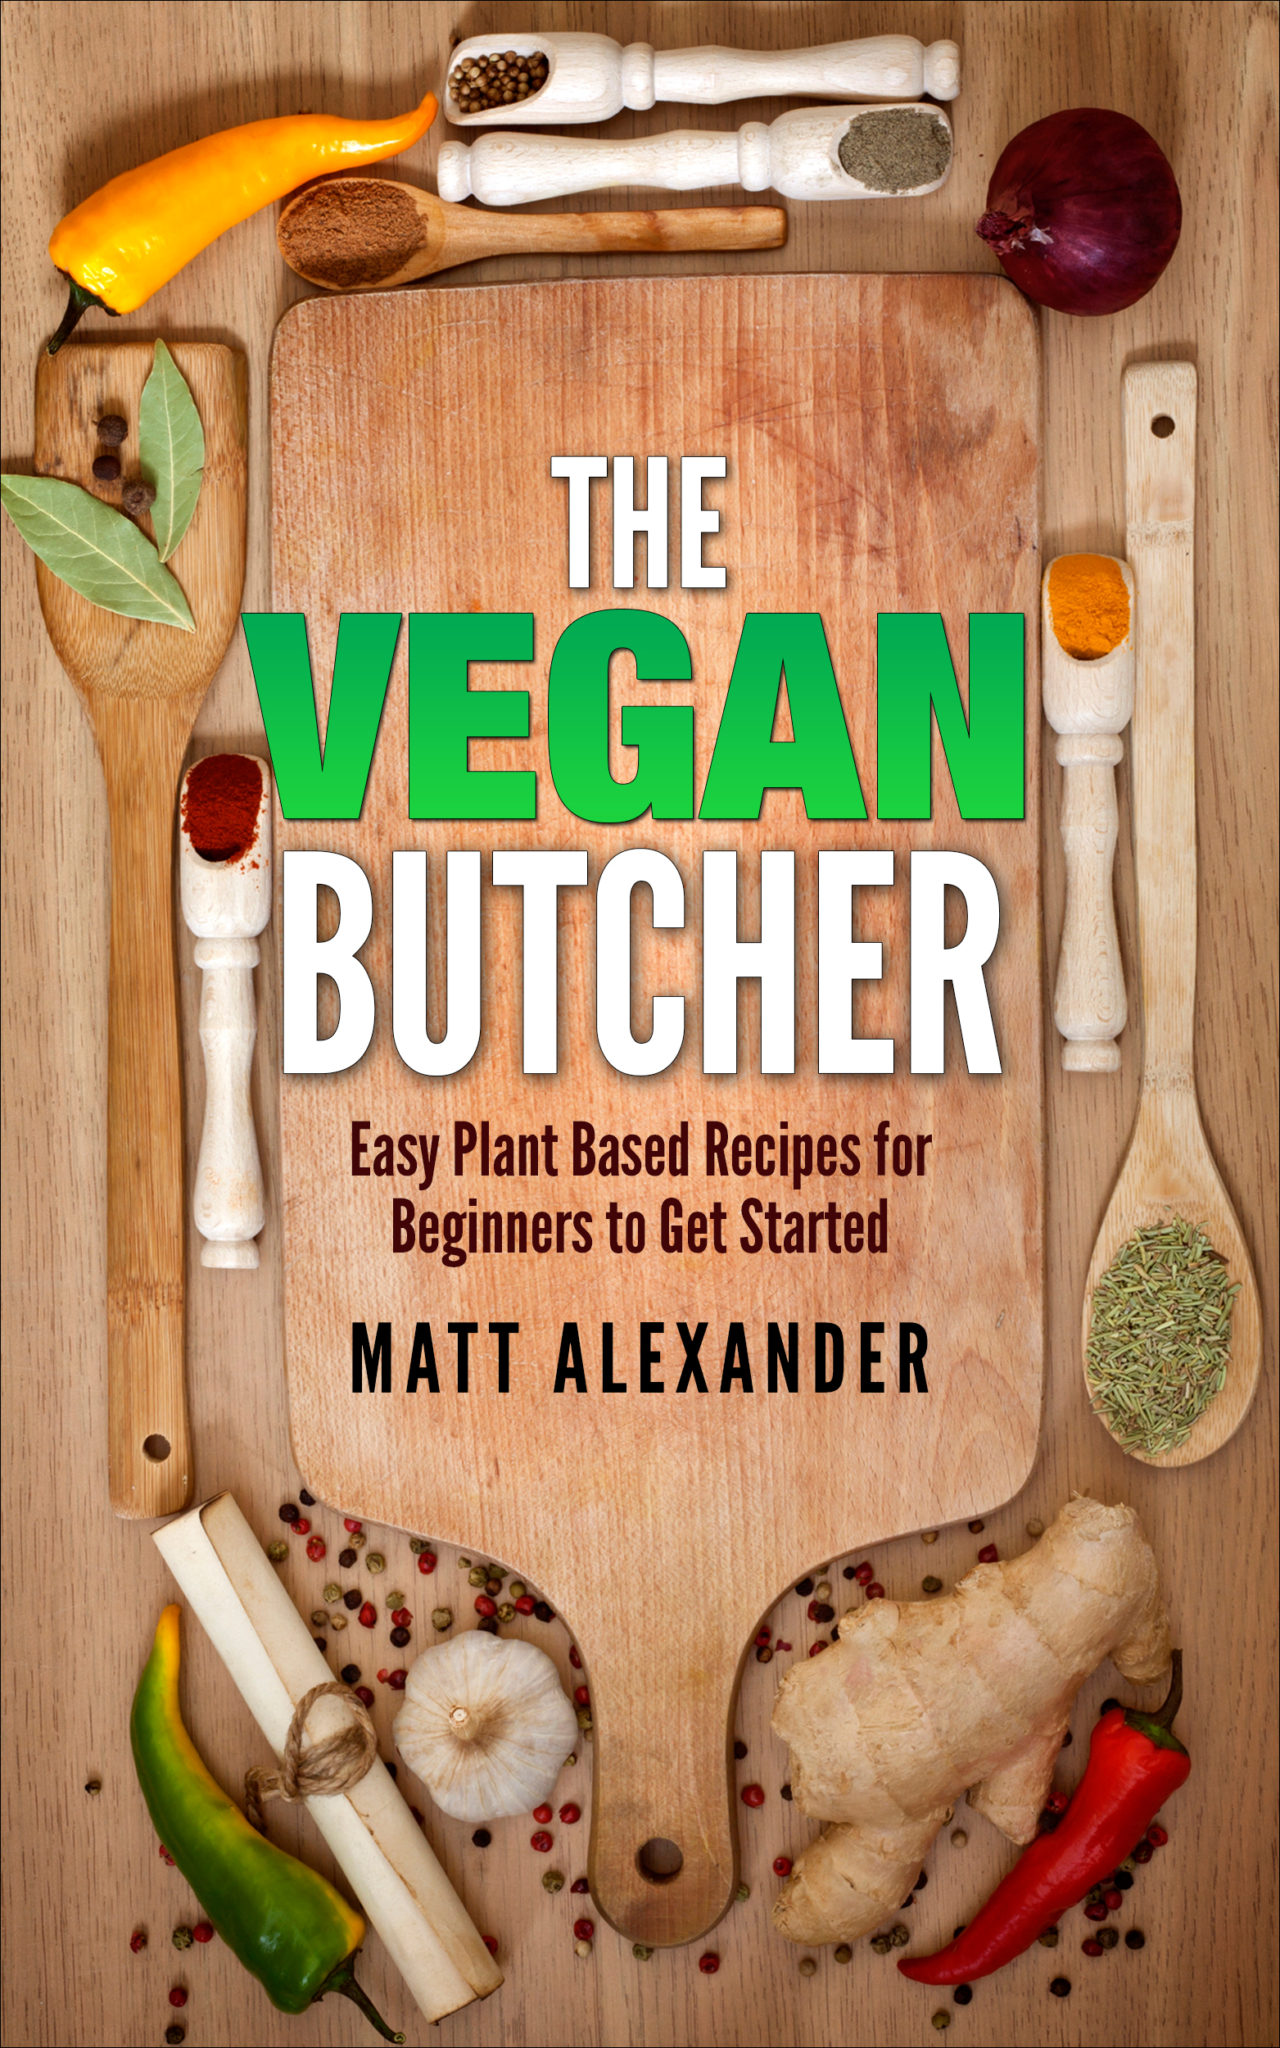 FREE: The Vegan Butcher, Easy Plant-Based Recipes For Beginners To Get Started by Matt Alexander